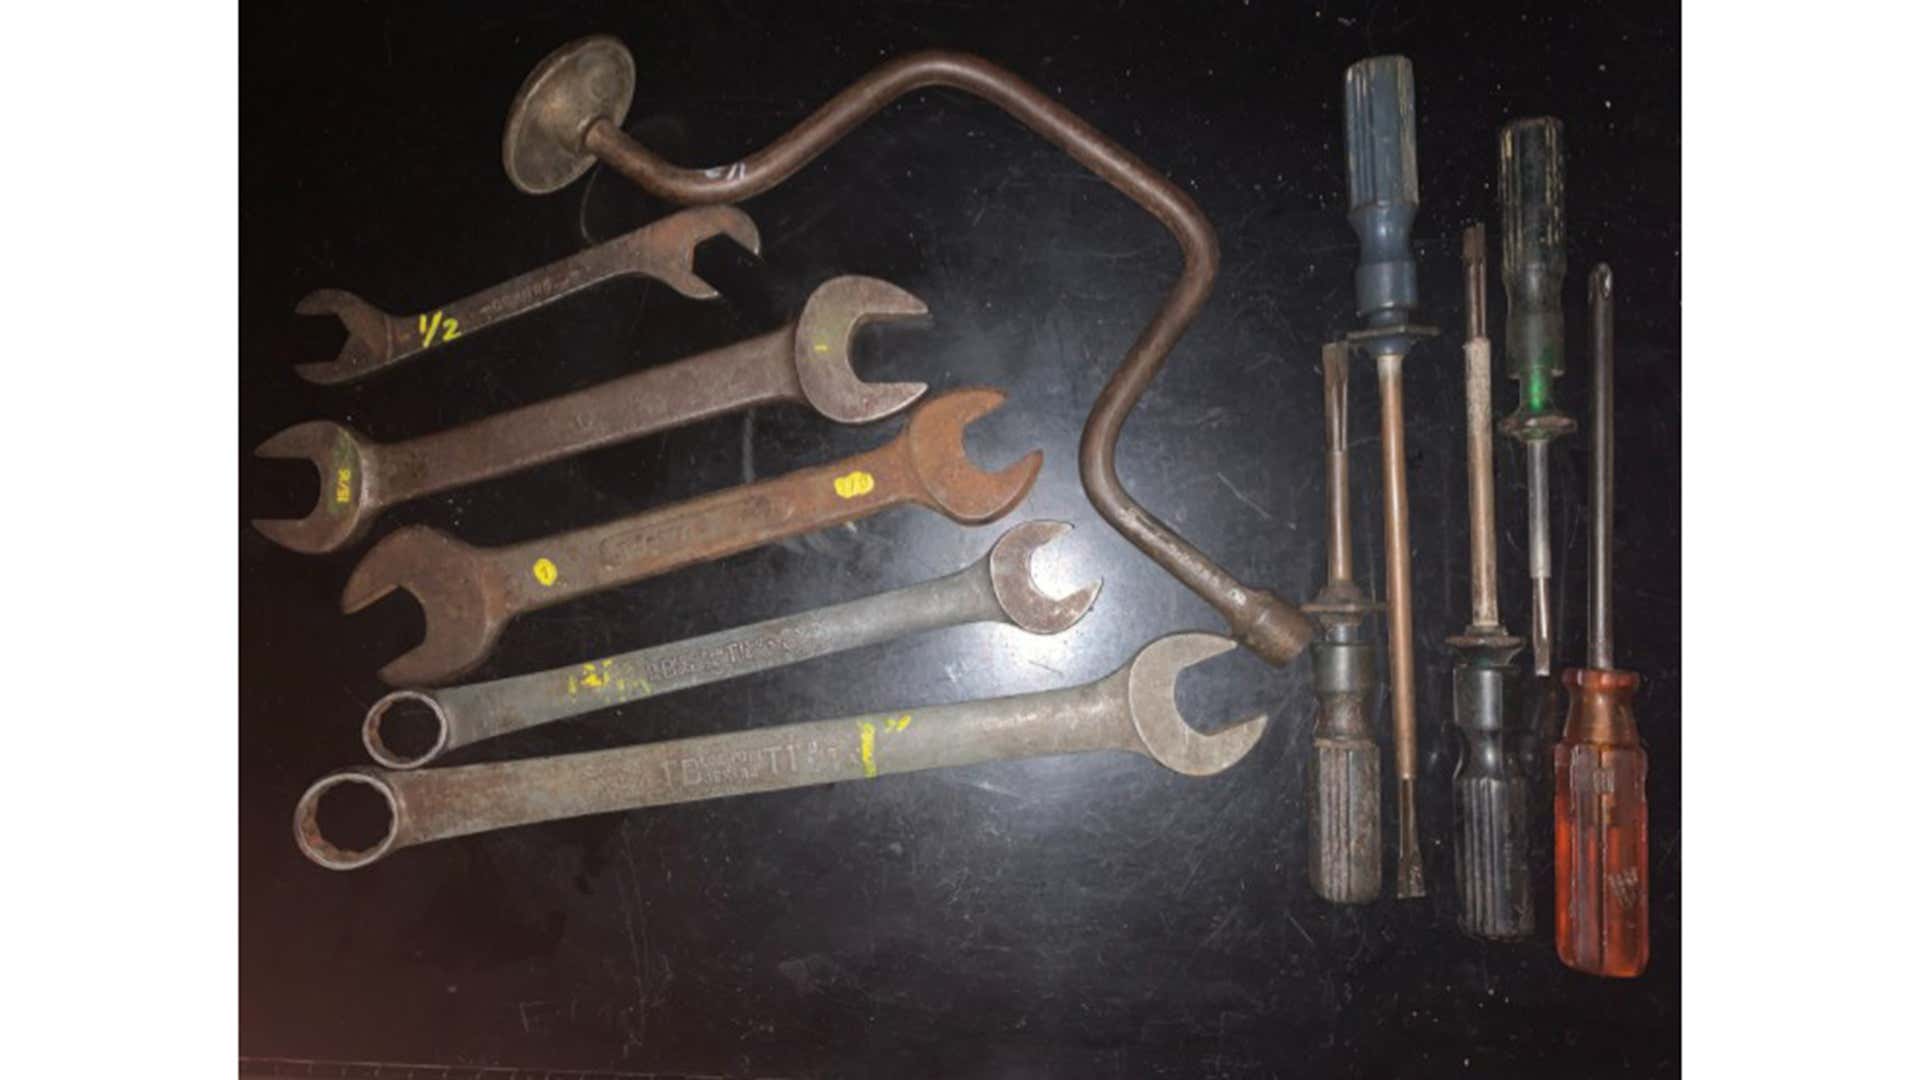 Old wrenches and screwdrivers on a black table.